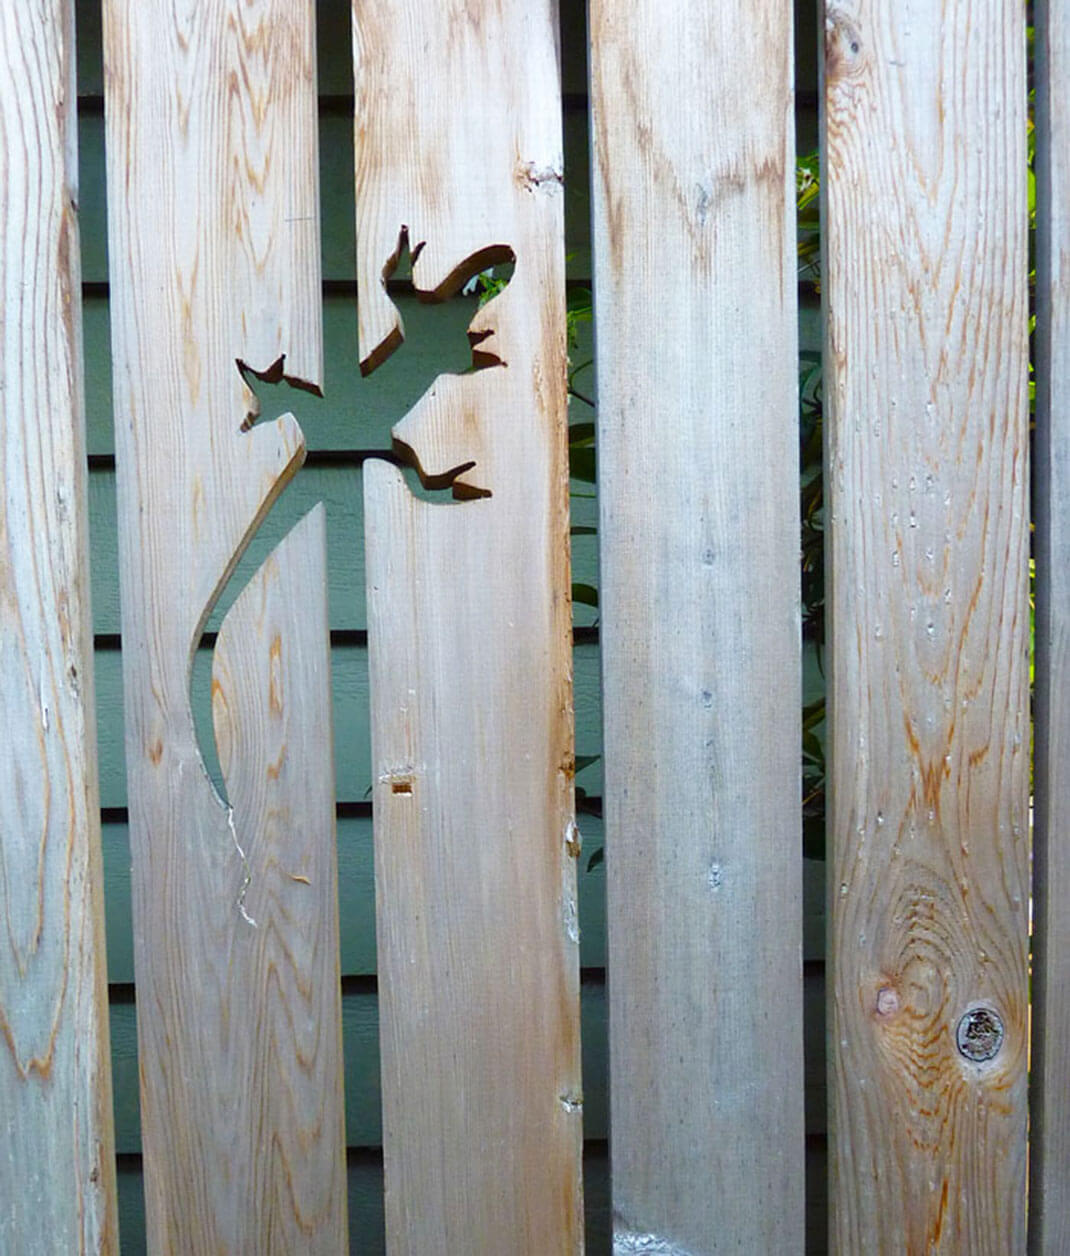 Adorable Lizard Cut into the Fence